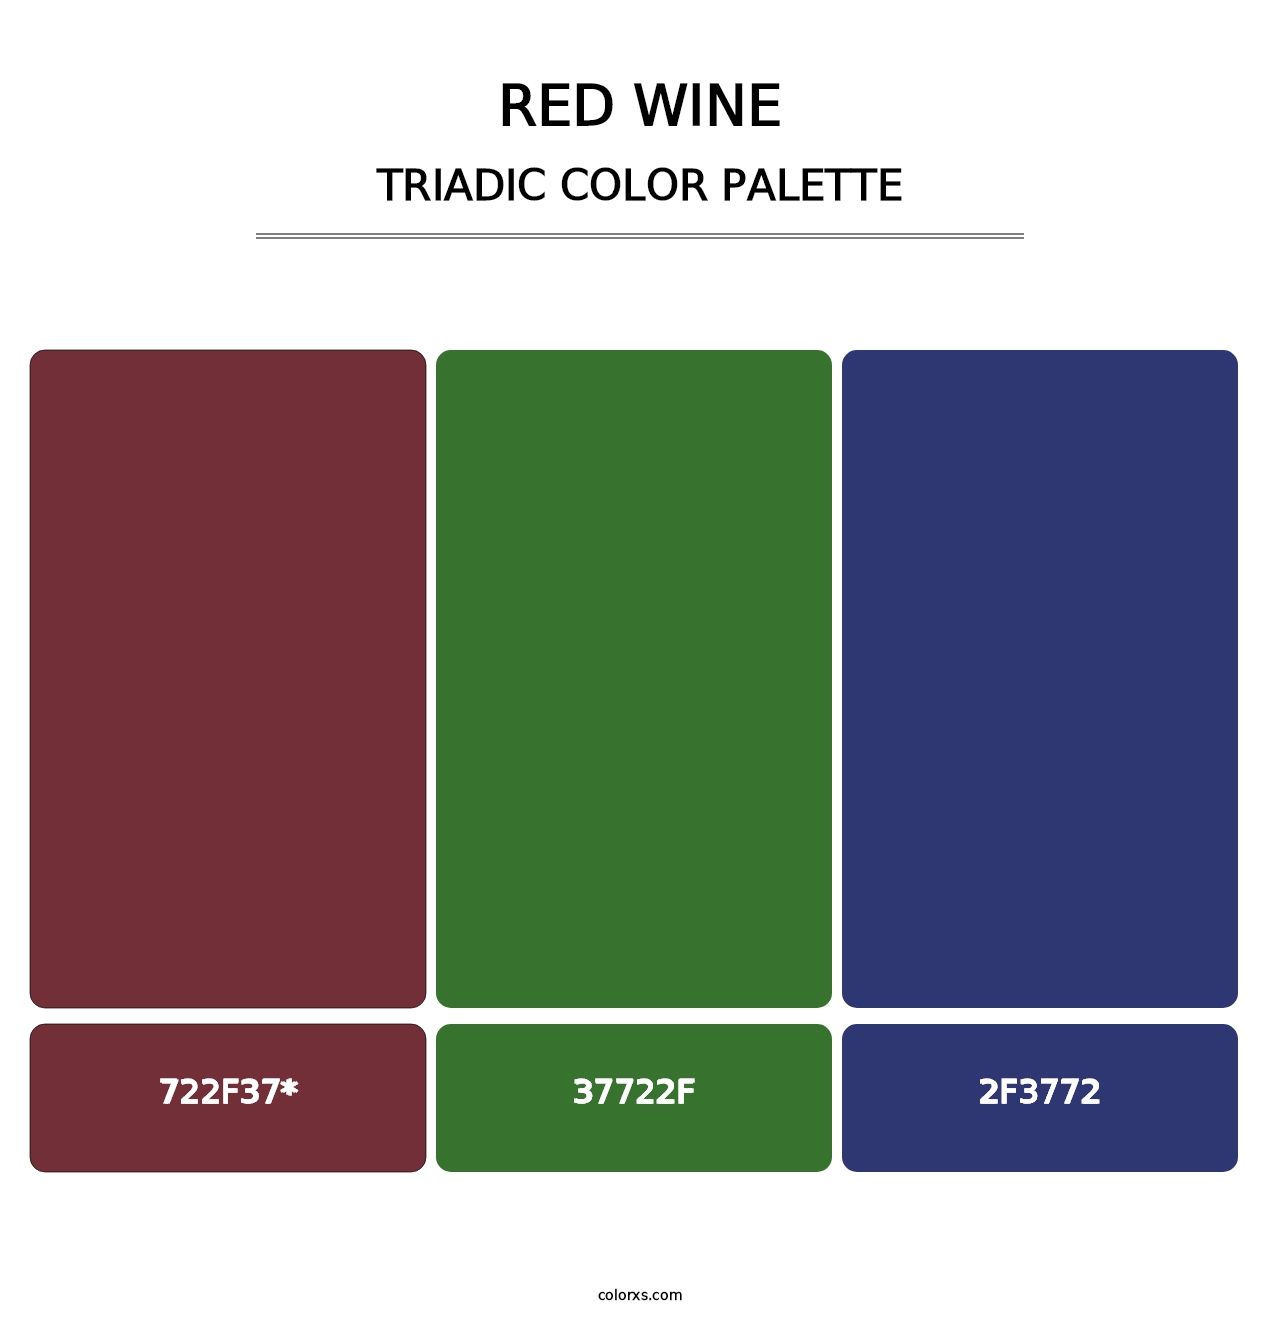 Red Wine - Triadic Color Palette